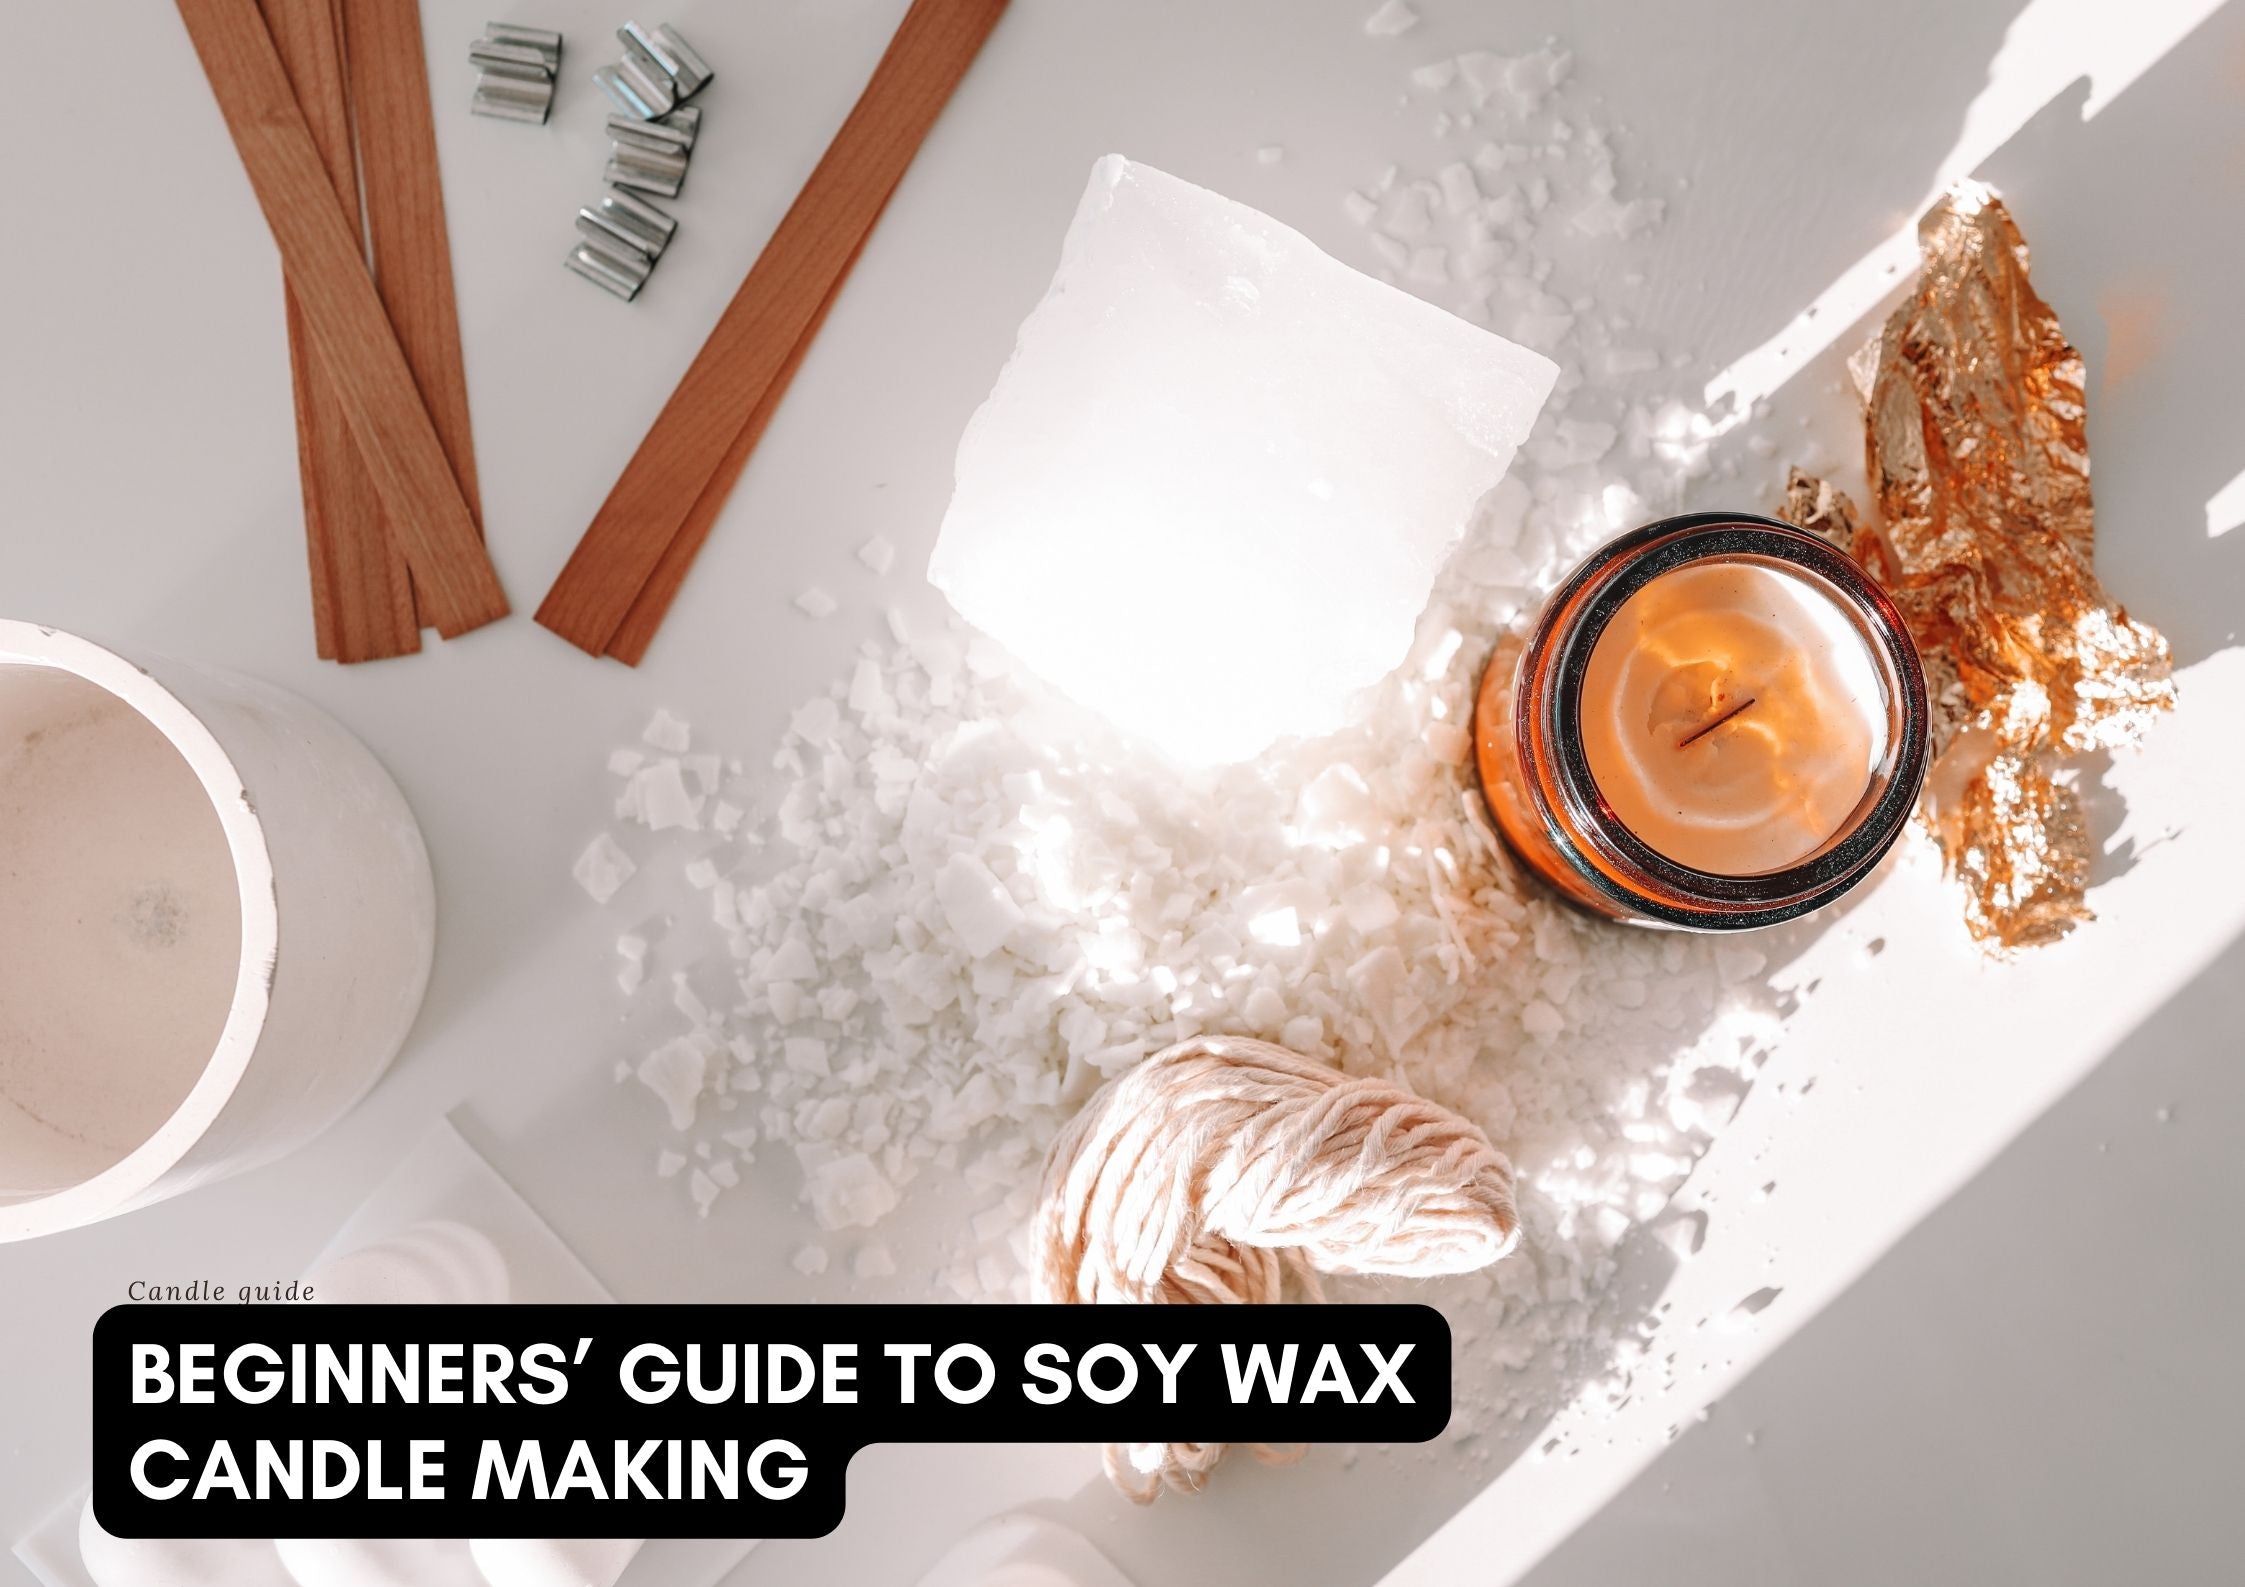 Beginners’ guide to soy wax candle making